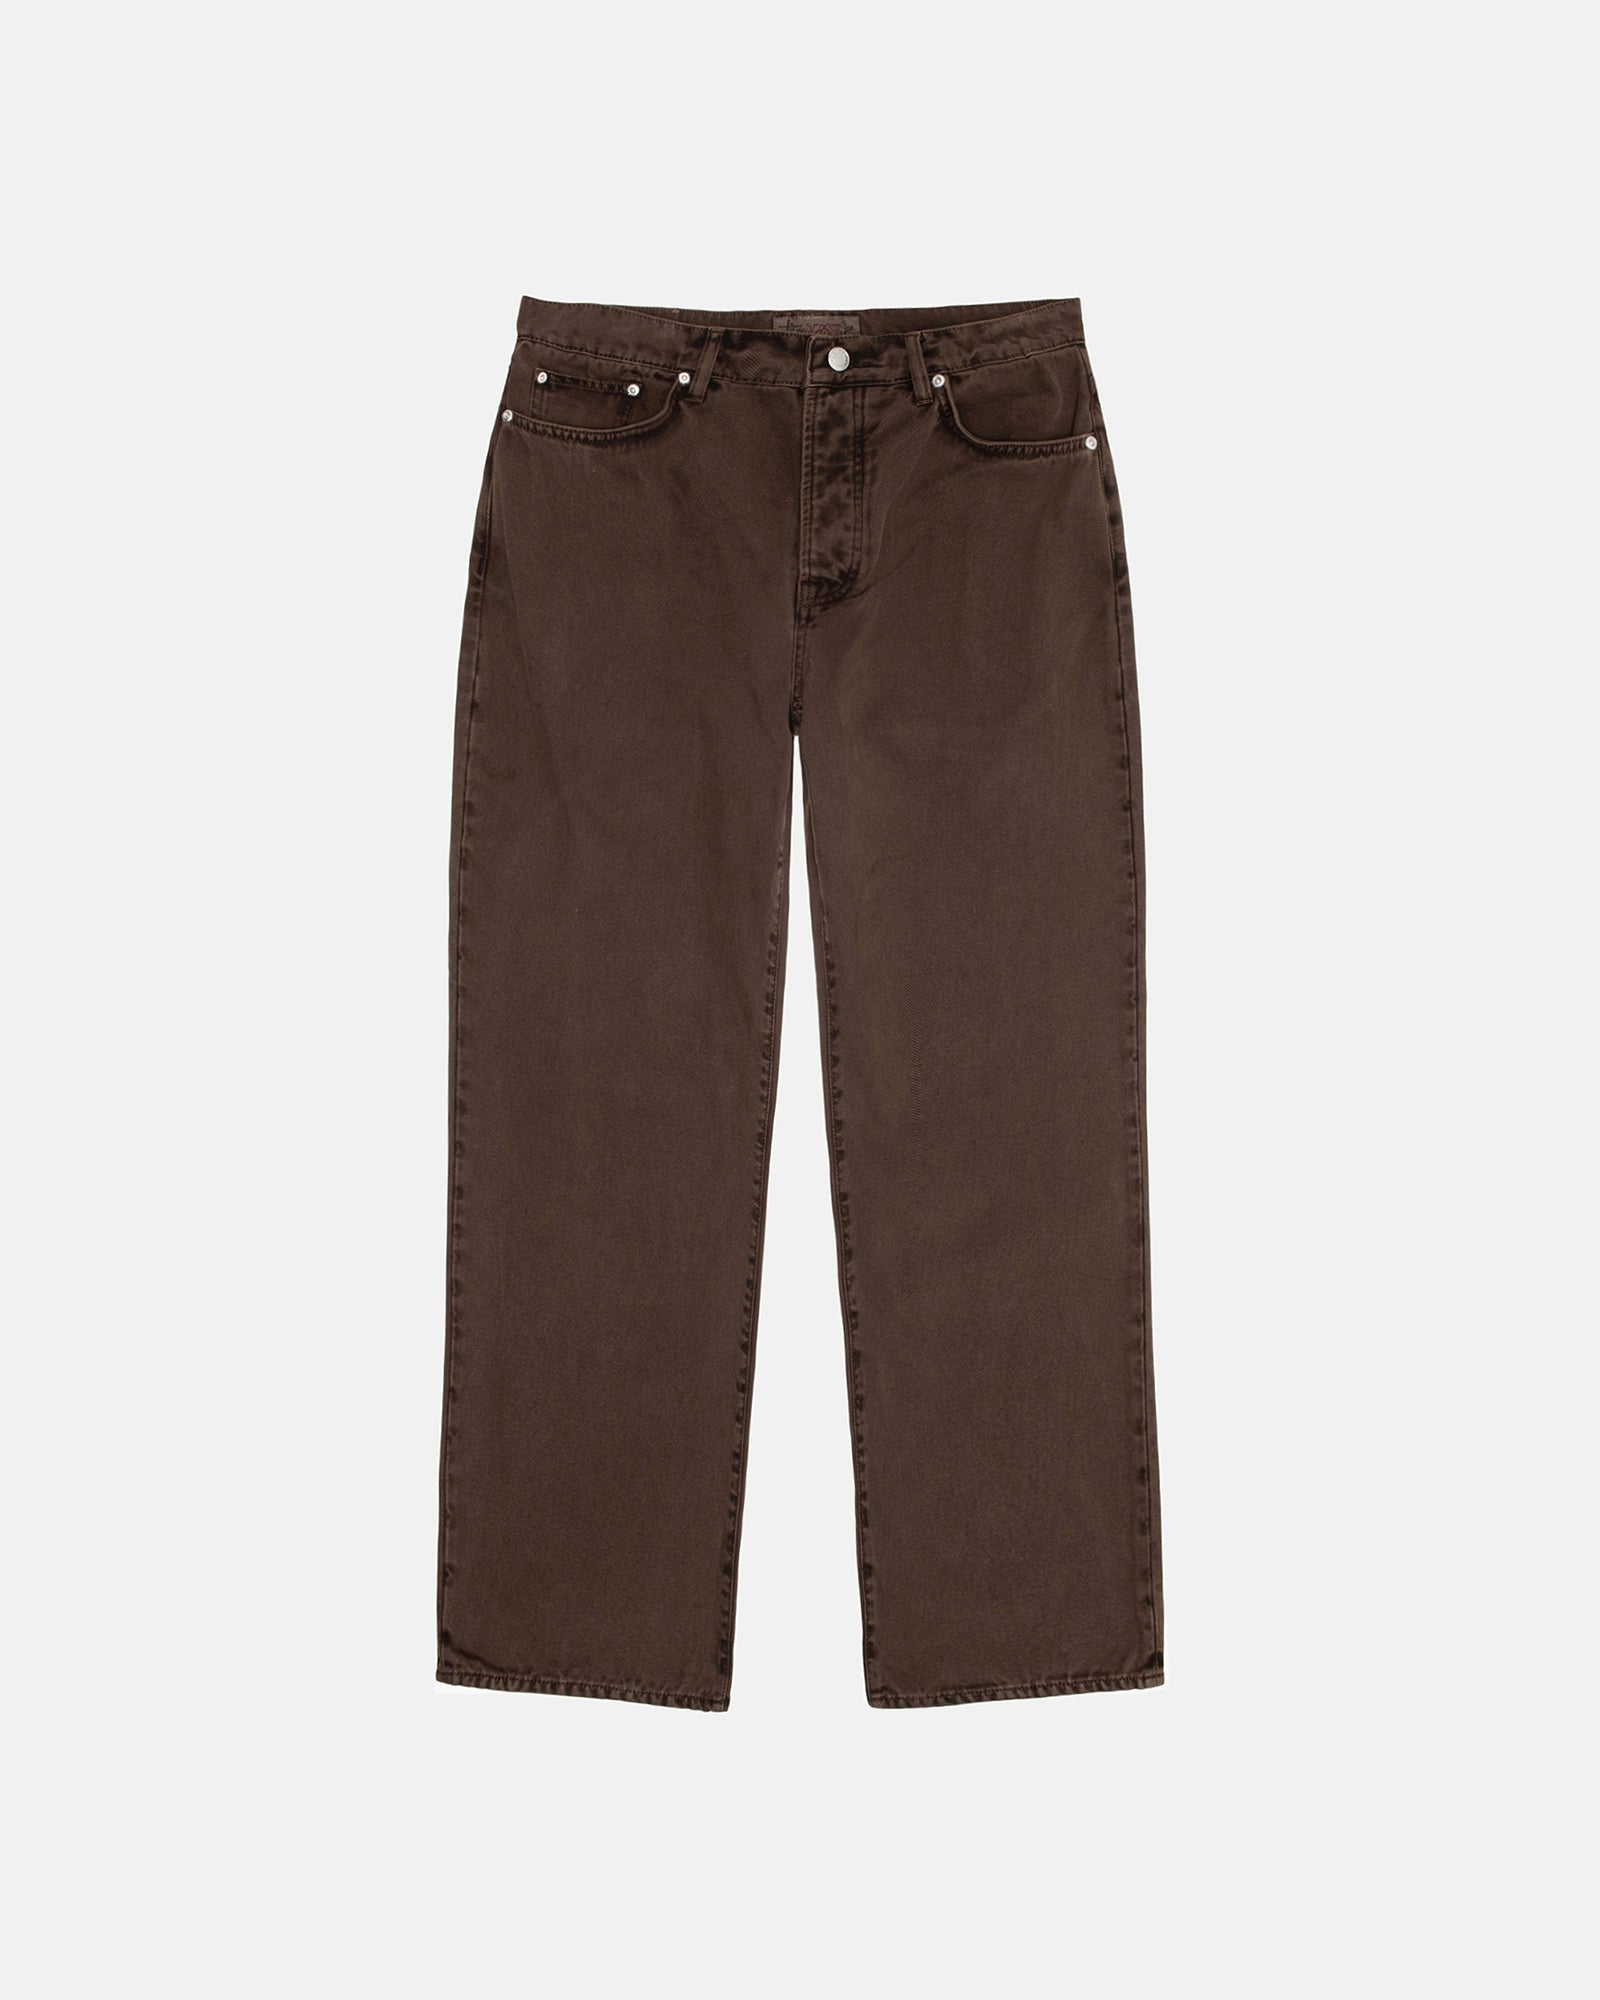 Stüssy Classic Jean Washed Canvas Brown Pants